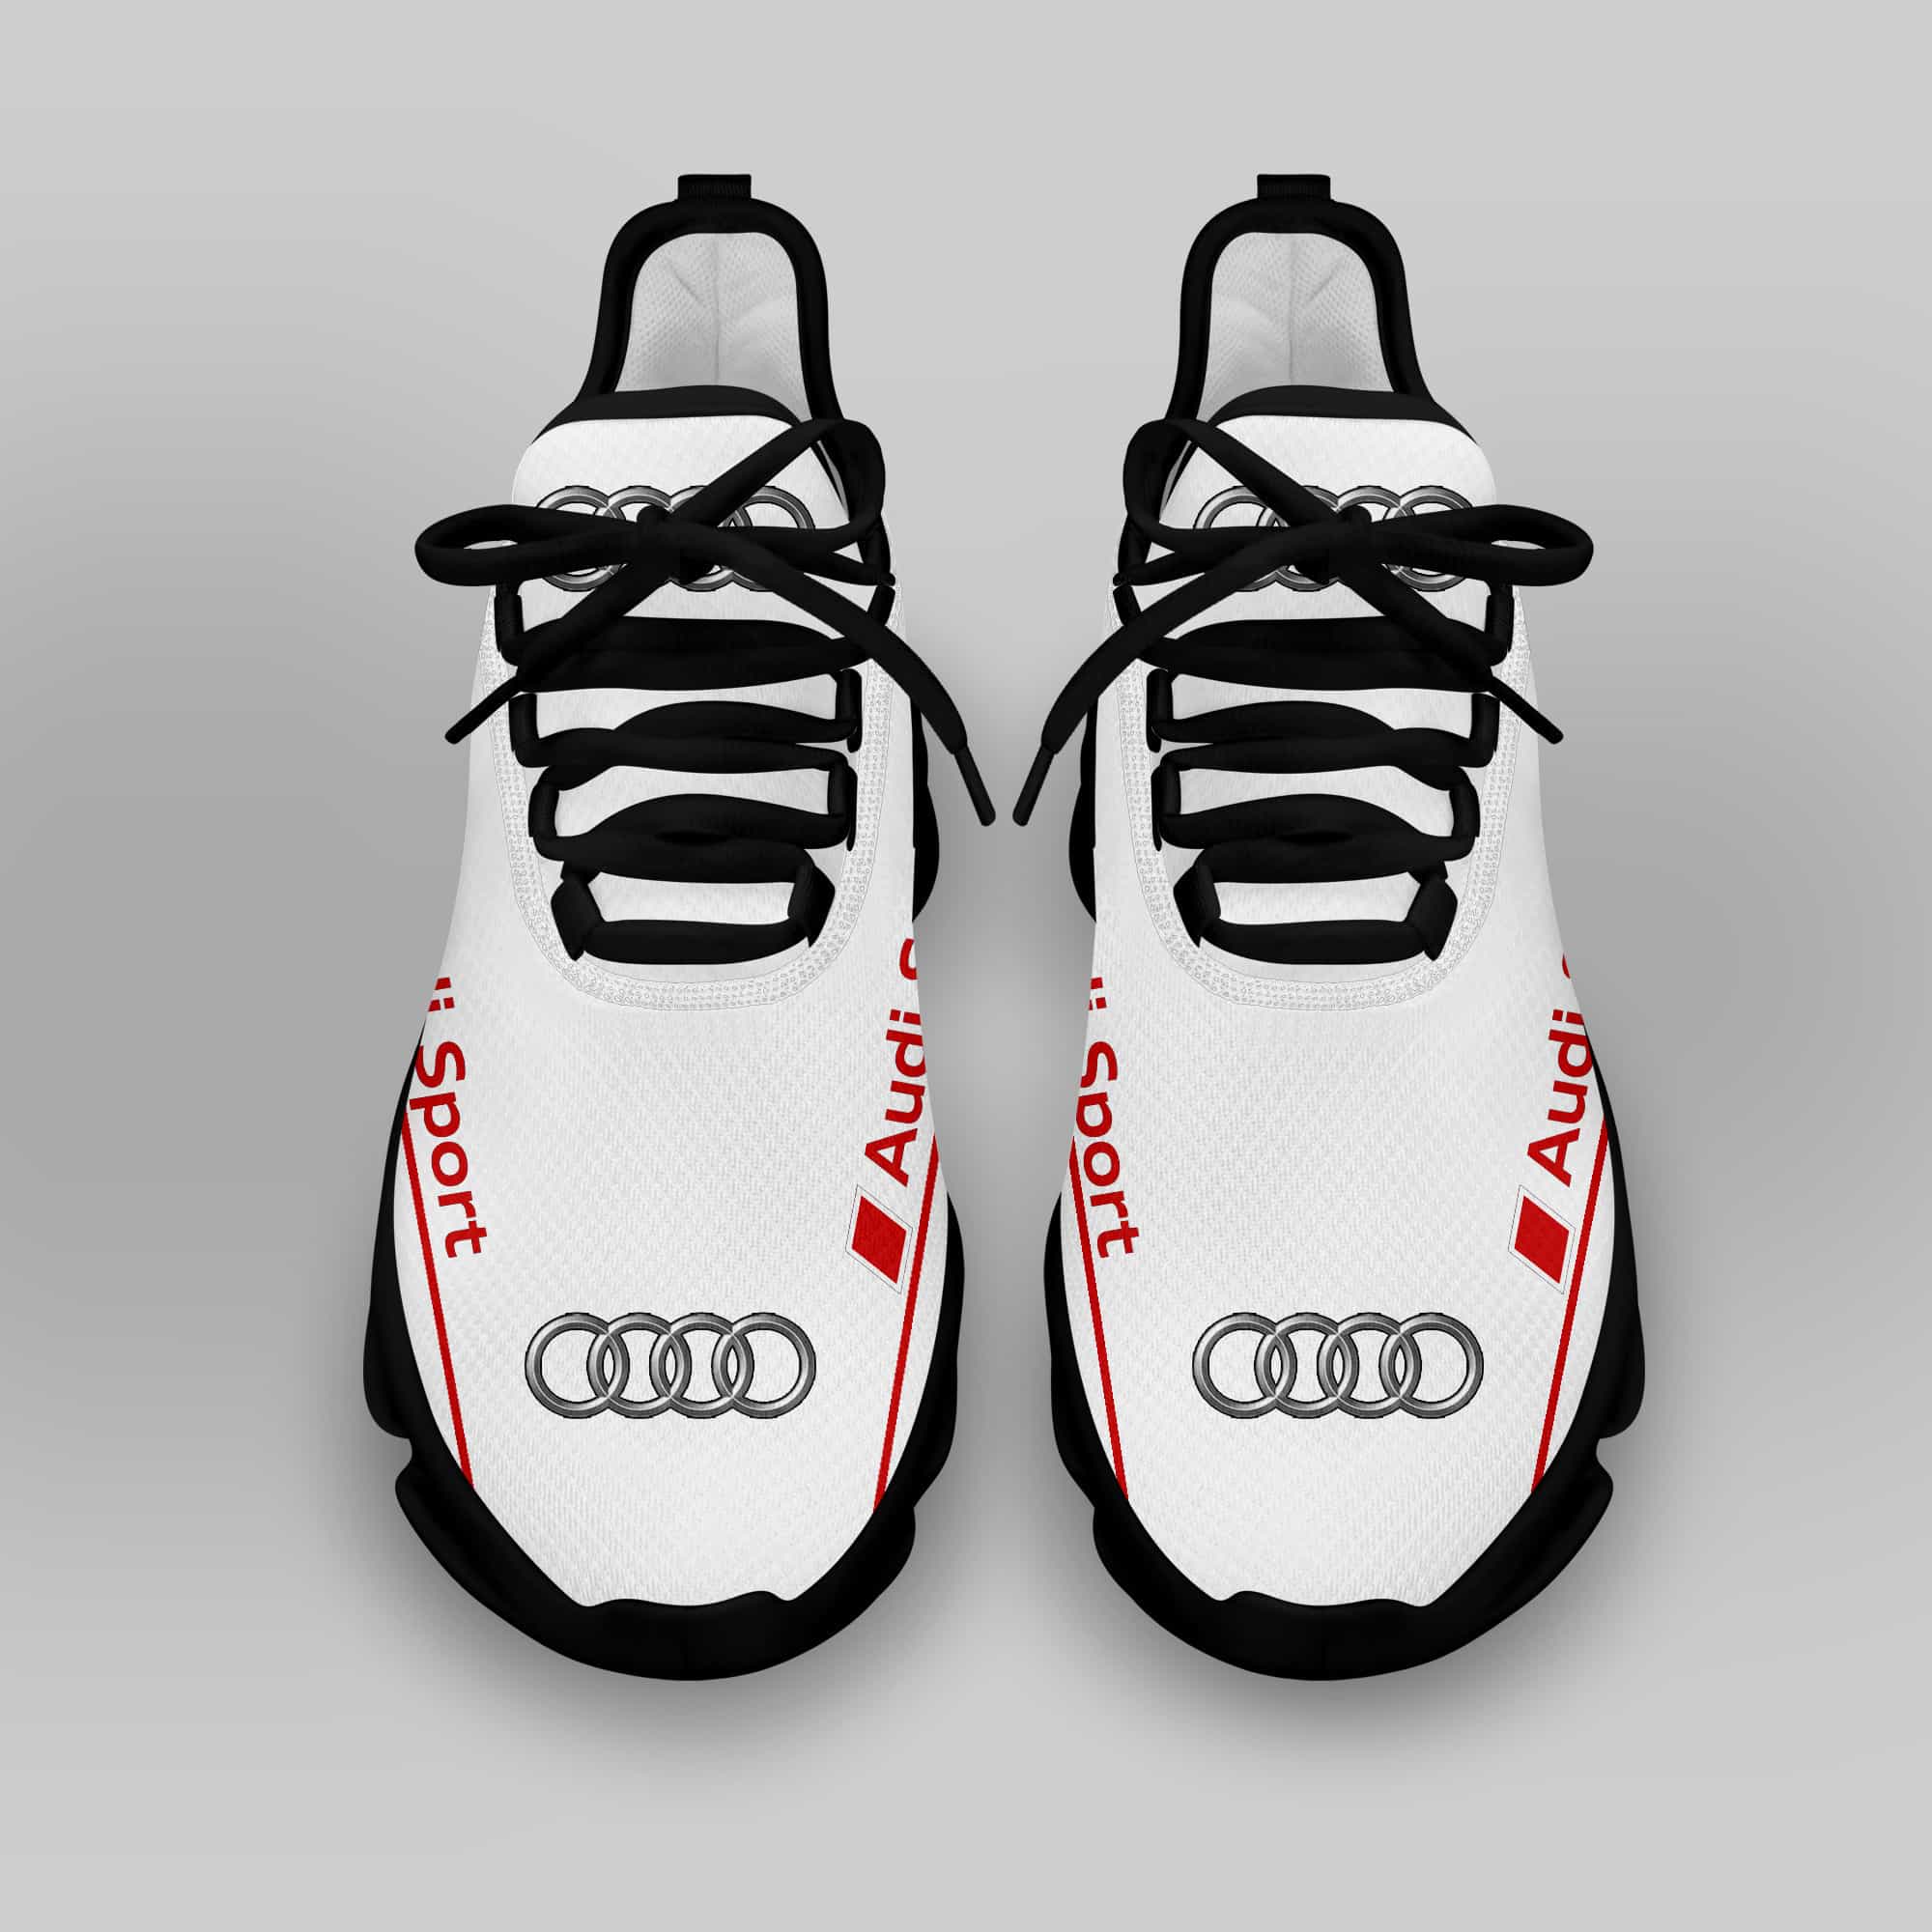 Audi Sport Running Shoes Max Soul Shoes Sneakers Ver 21 4